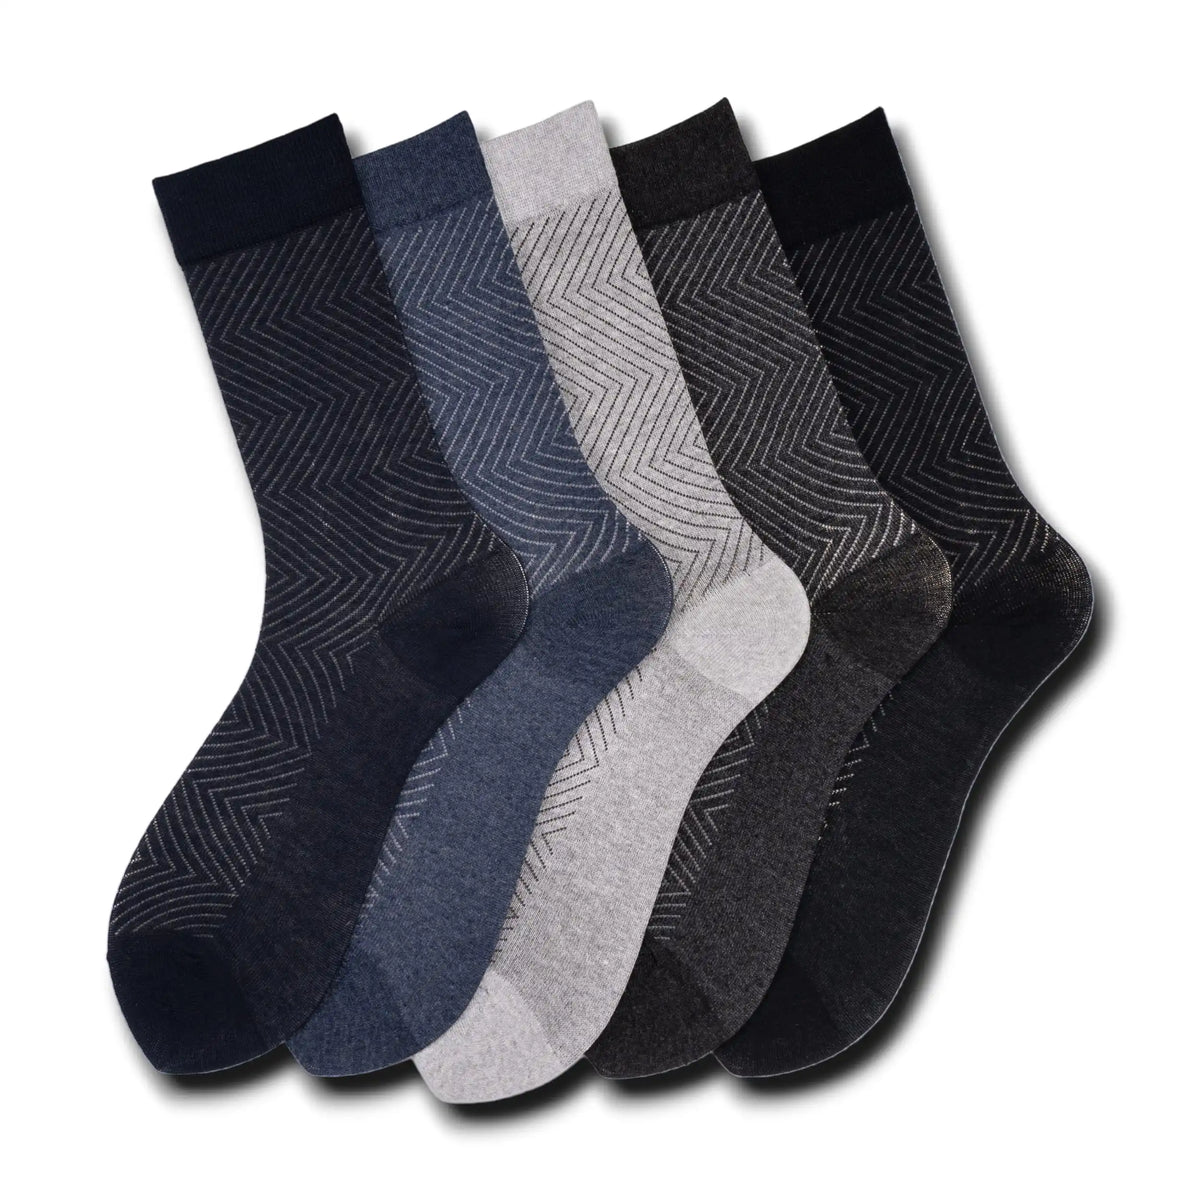 Young Wings Men's Multi Colour Cotton Fabric Solid Full Length Socks - Pack of 5, Style no. 3304-M1